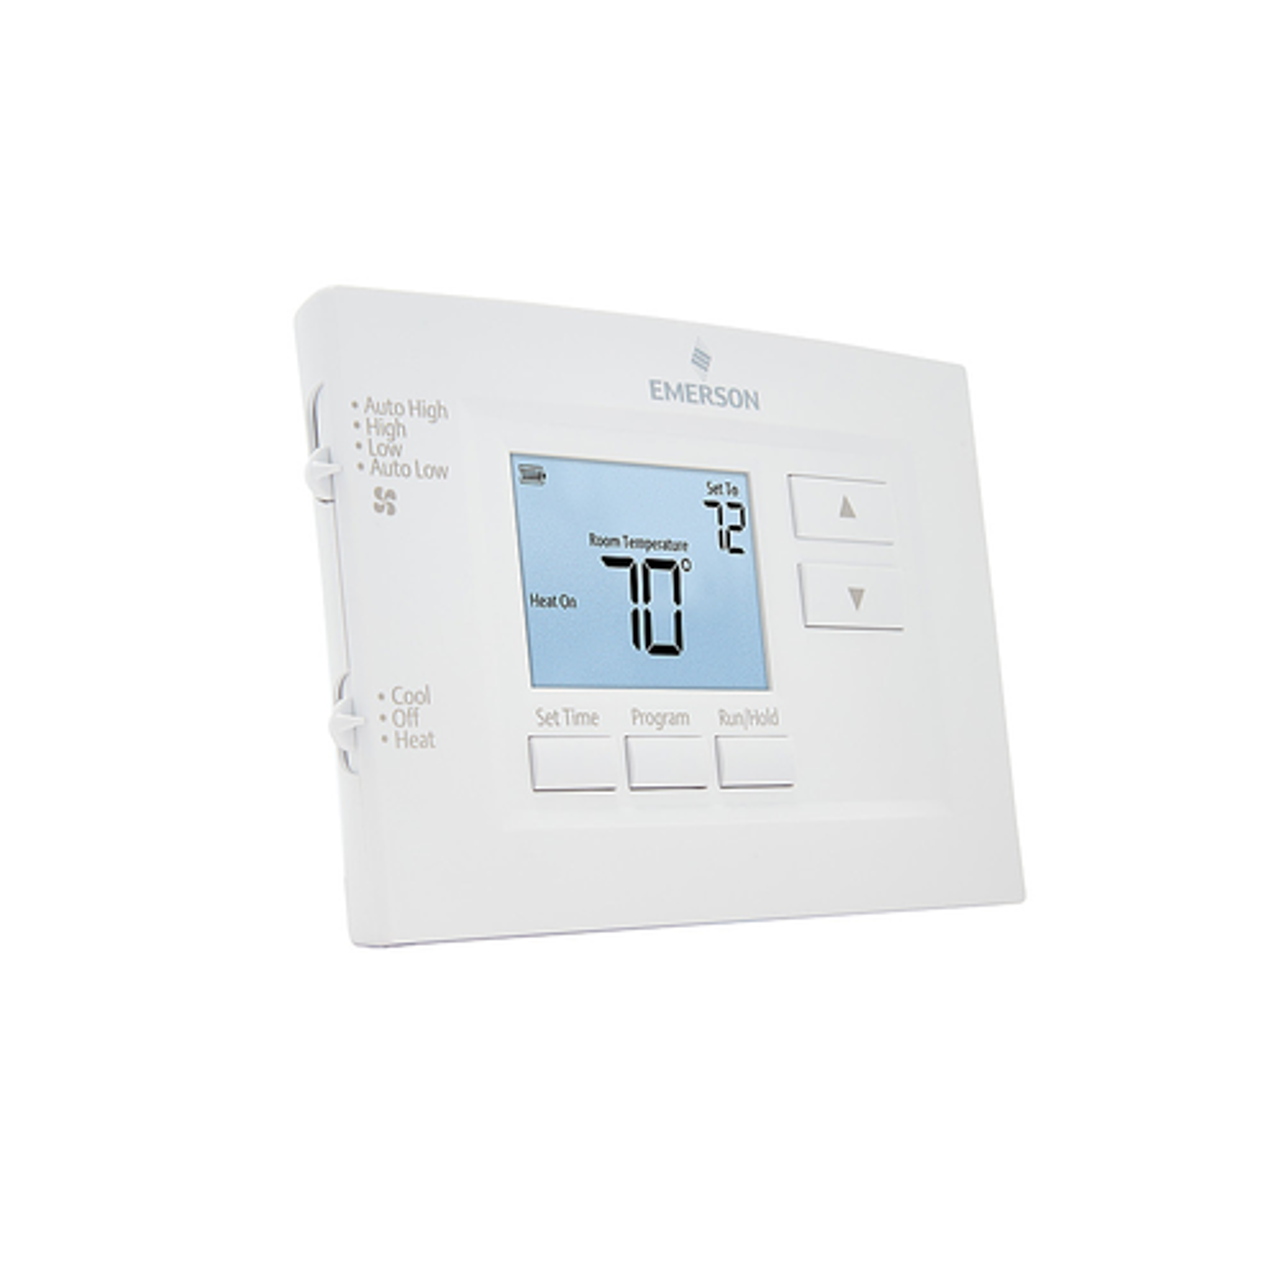 Emerson - 70 Series, 7-Day PTAC Digital Programmable Thermostat - White